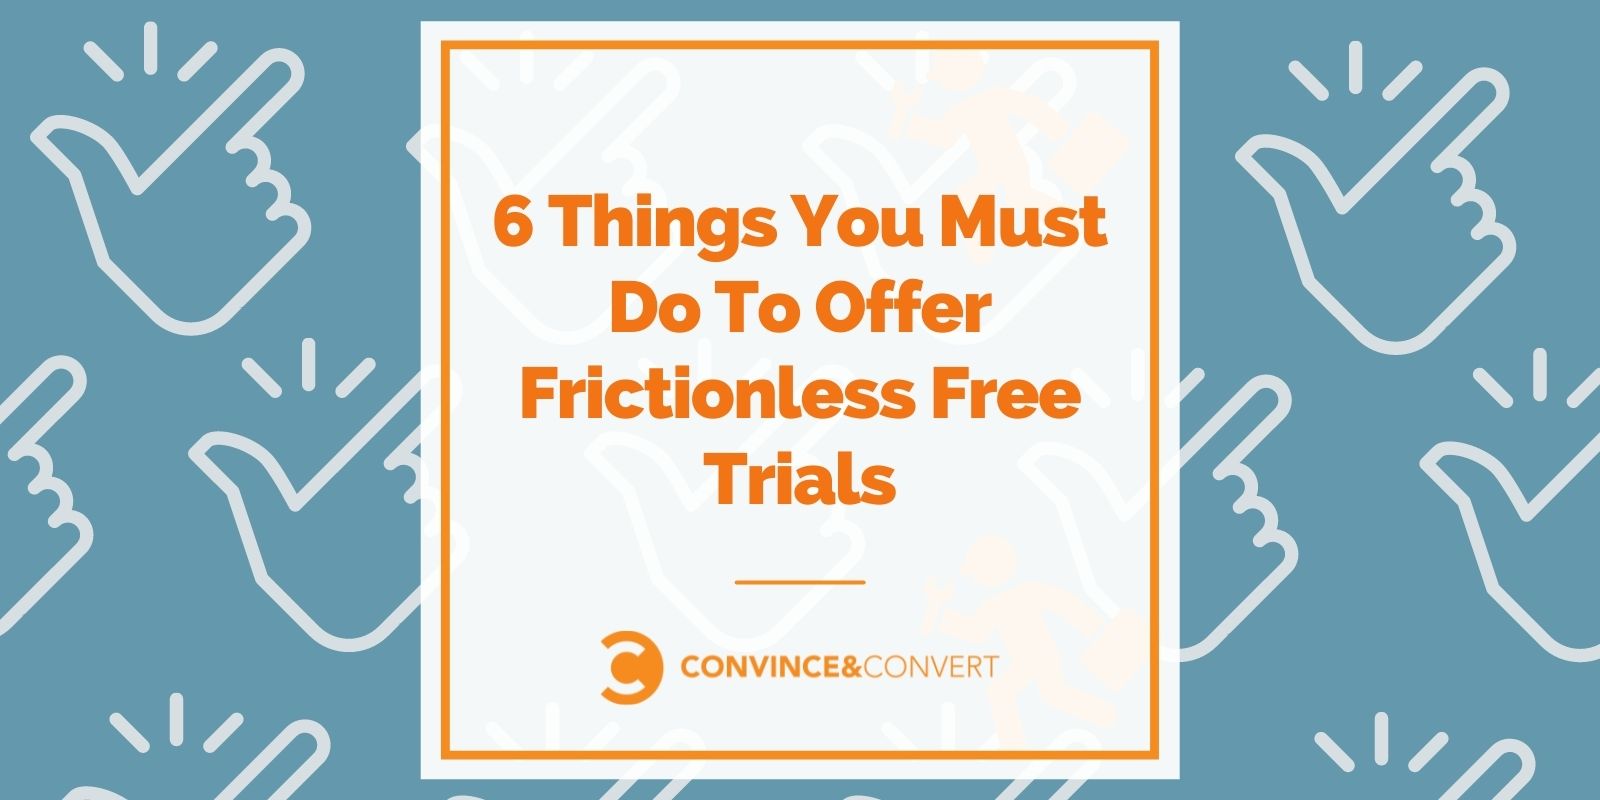 6 Things You Must Do To Offer Frictionless Free Trials